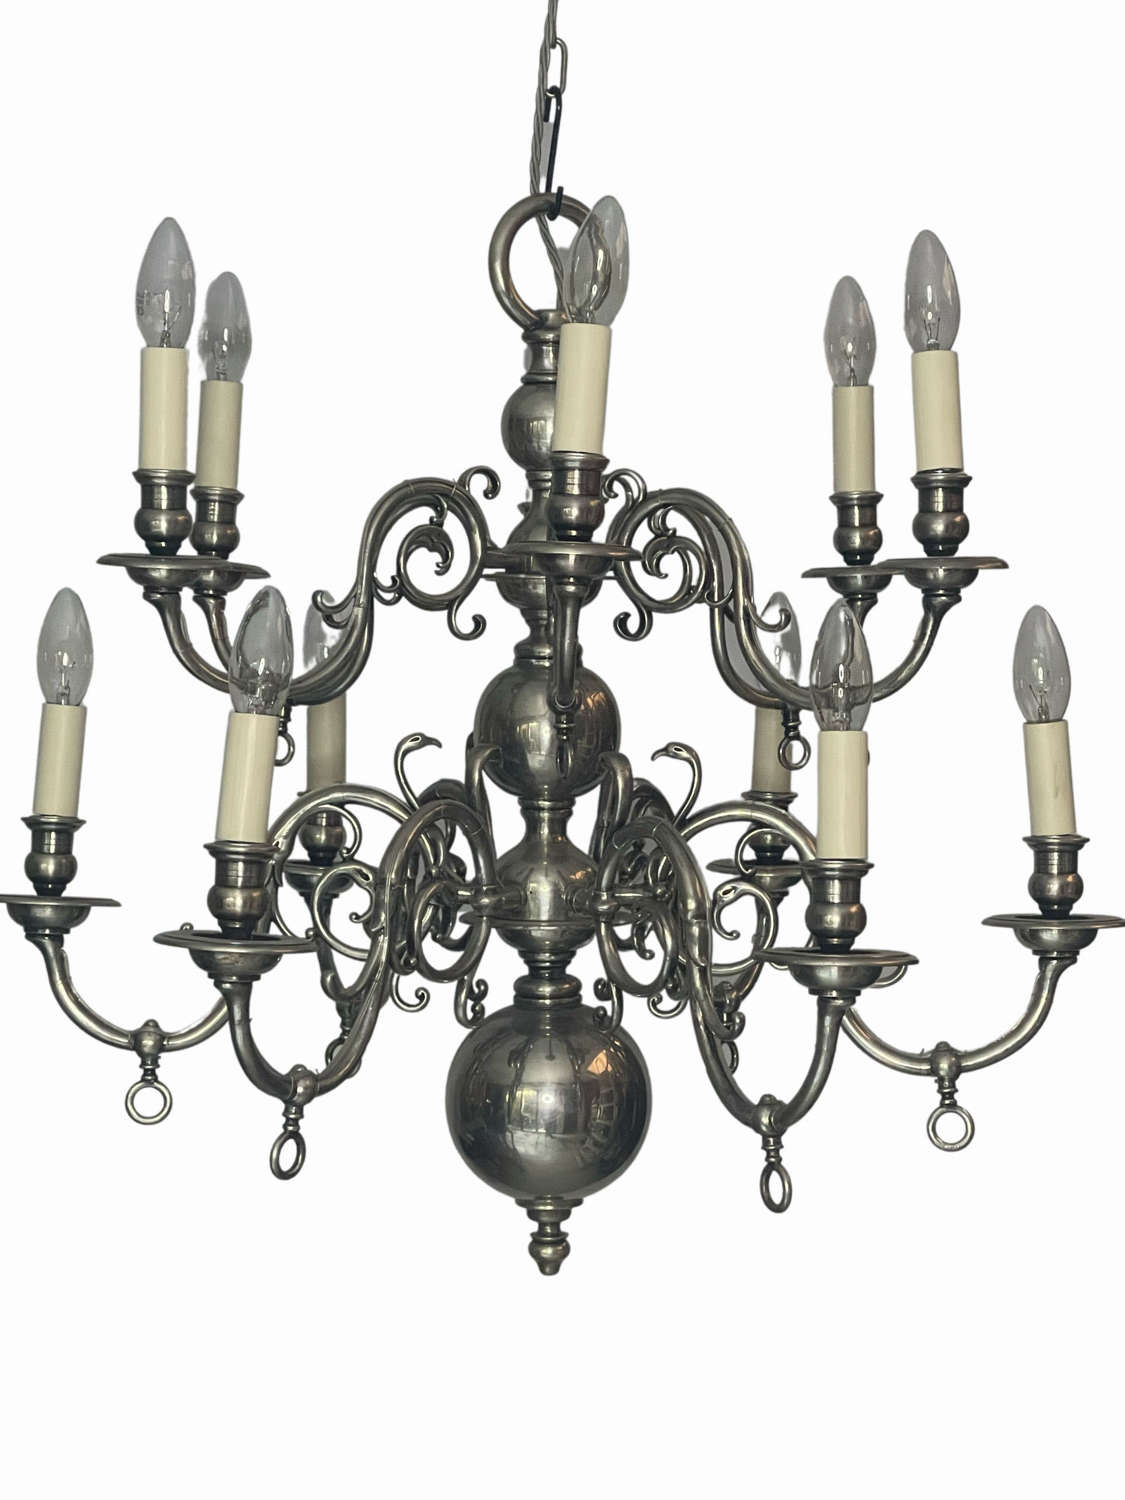 A two tiered Dutch style chandelier